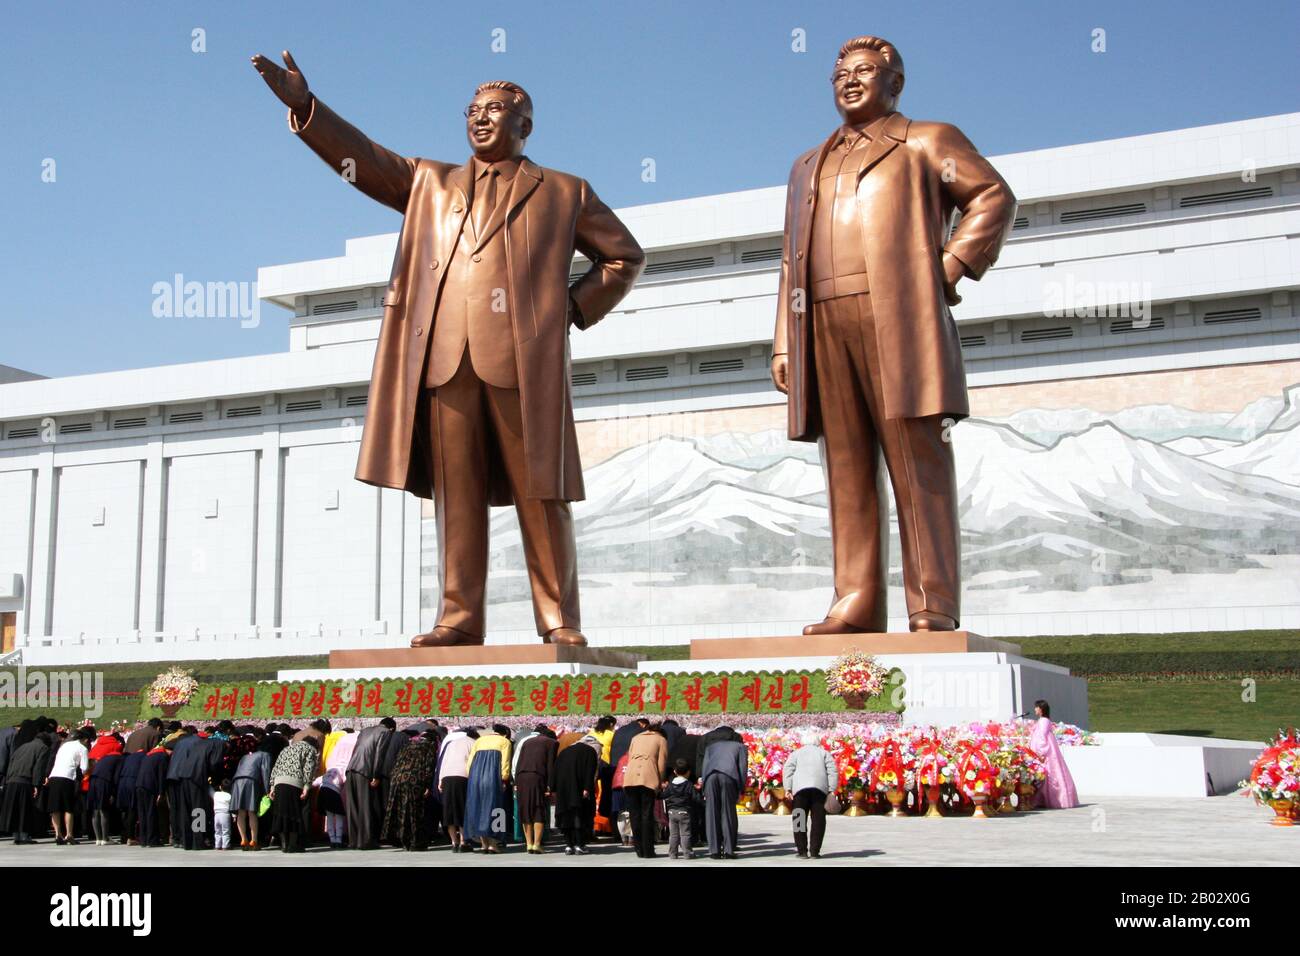 The Grand Monument on Mansu Hill (Mansudae) is a complex of monuments in Pyongyang, North Korea.  The central part of the monument are two 22 metre high bronze statues of North Korean leaders Kim Il-sung and Kim Jong-il. Behind the statues is a wall of the Korean Revolution Museum building, displaying a mosaic mural showing a scene from Mount Paektu, considered to be the sacred mountain of revolution.  The monument was constructed in April 1972, then displaying only Kim Il-sung. Following the death of Kim Jong-il, a similar statue of him was erected on the left side of Kim Il-sung. Stock Photo